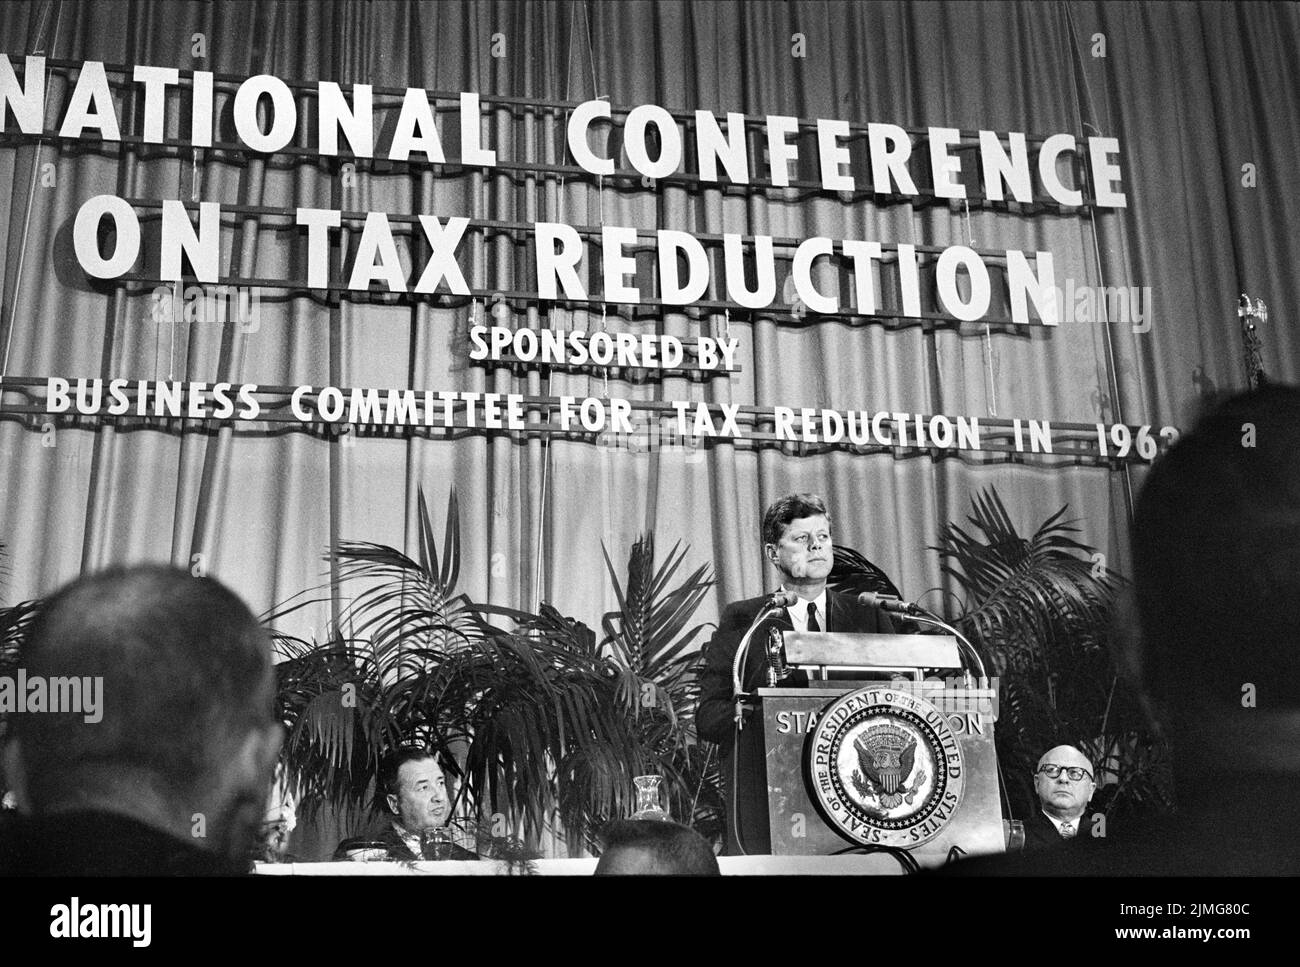 U.S. President John F. Kennedy at  lectern speaking at National Conference on Tax Reduction, Washington, D.C., USA, Marion S. Trikosko, U.S. News & World Report Magazine Photograph Collection, September 10, 1963 Stock Photo